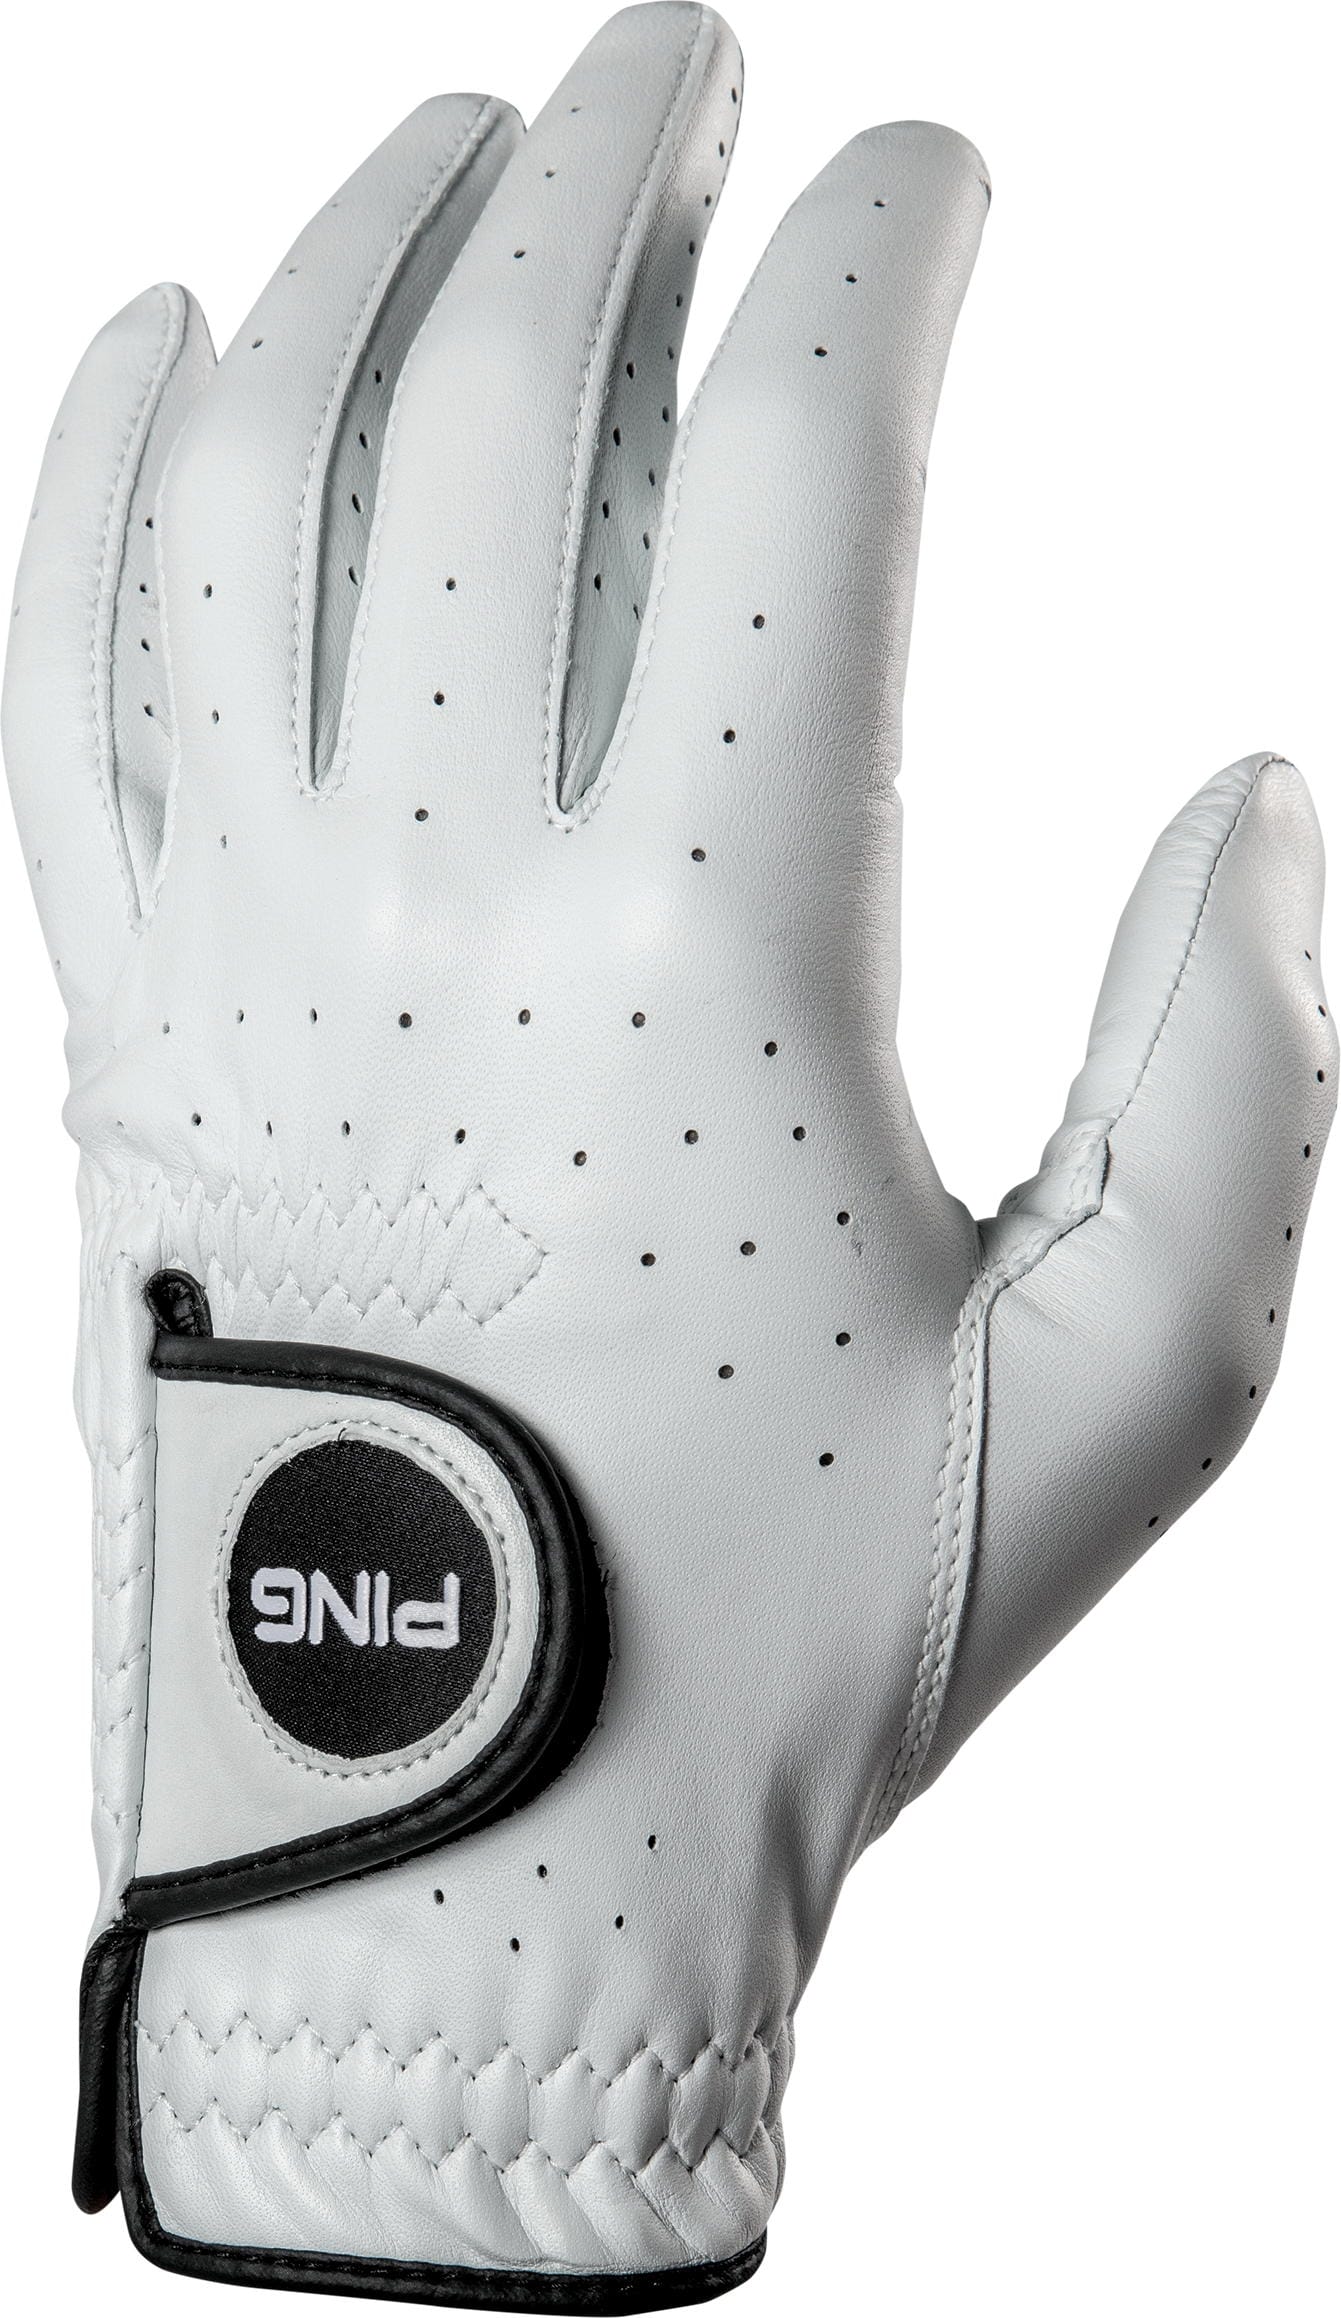 Ping Tour Handschuh